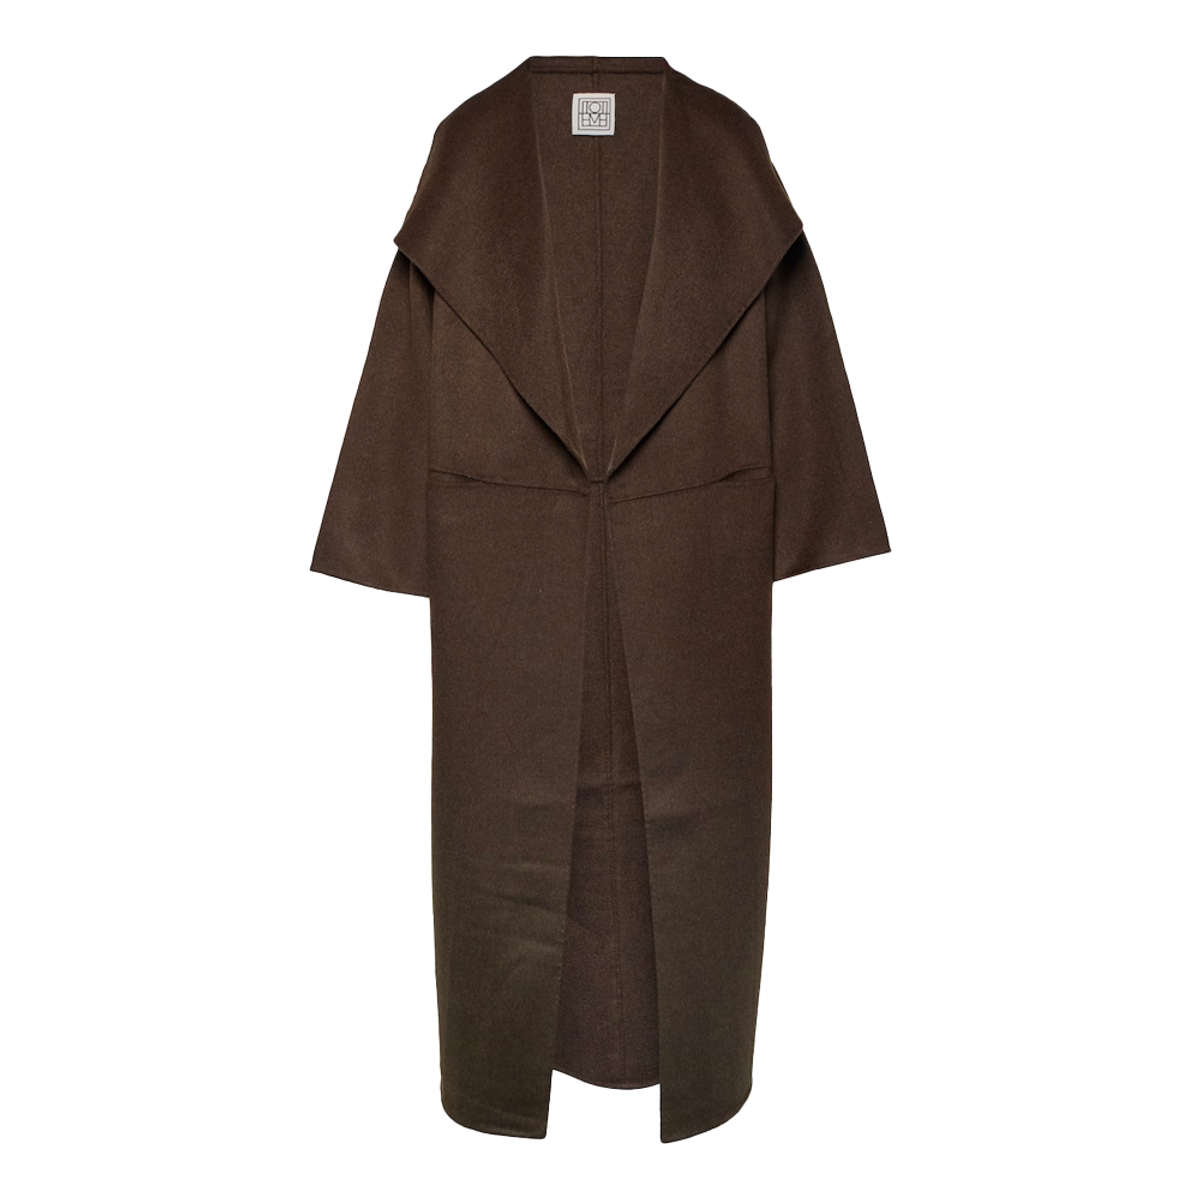 Signature Wool and Cashmere coat